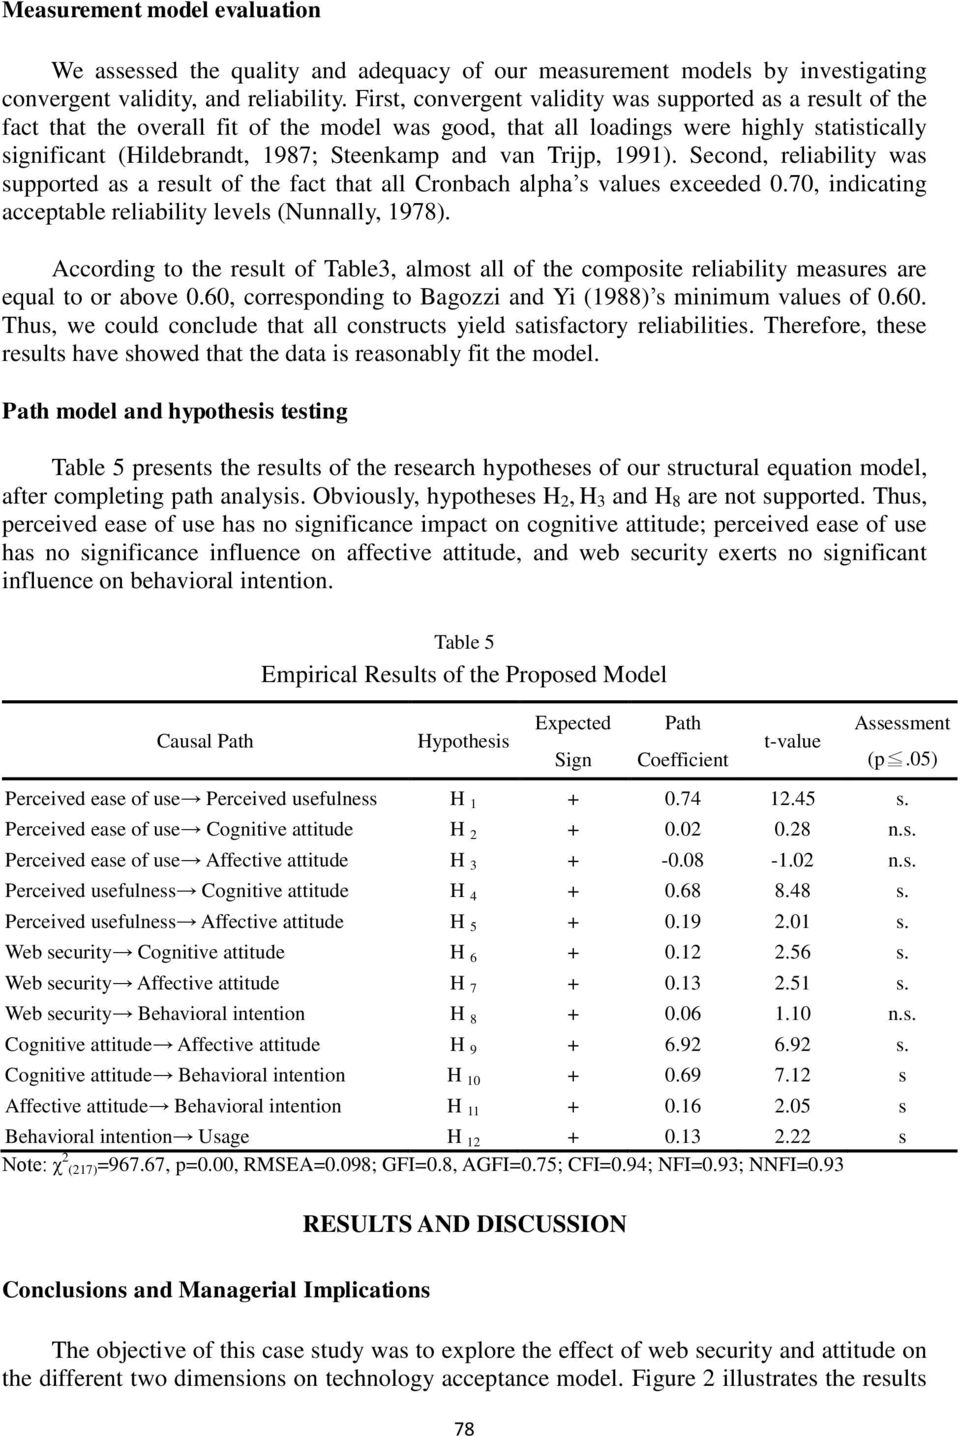 van Trijp, 1991). Second, reliability was supported as a result of the fact that all Cronbach alpha s values exceeded 0.70, indicating acceptable reliability levels (Nunnally, 1978).